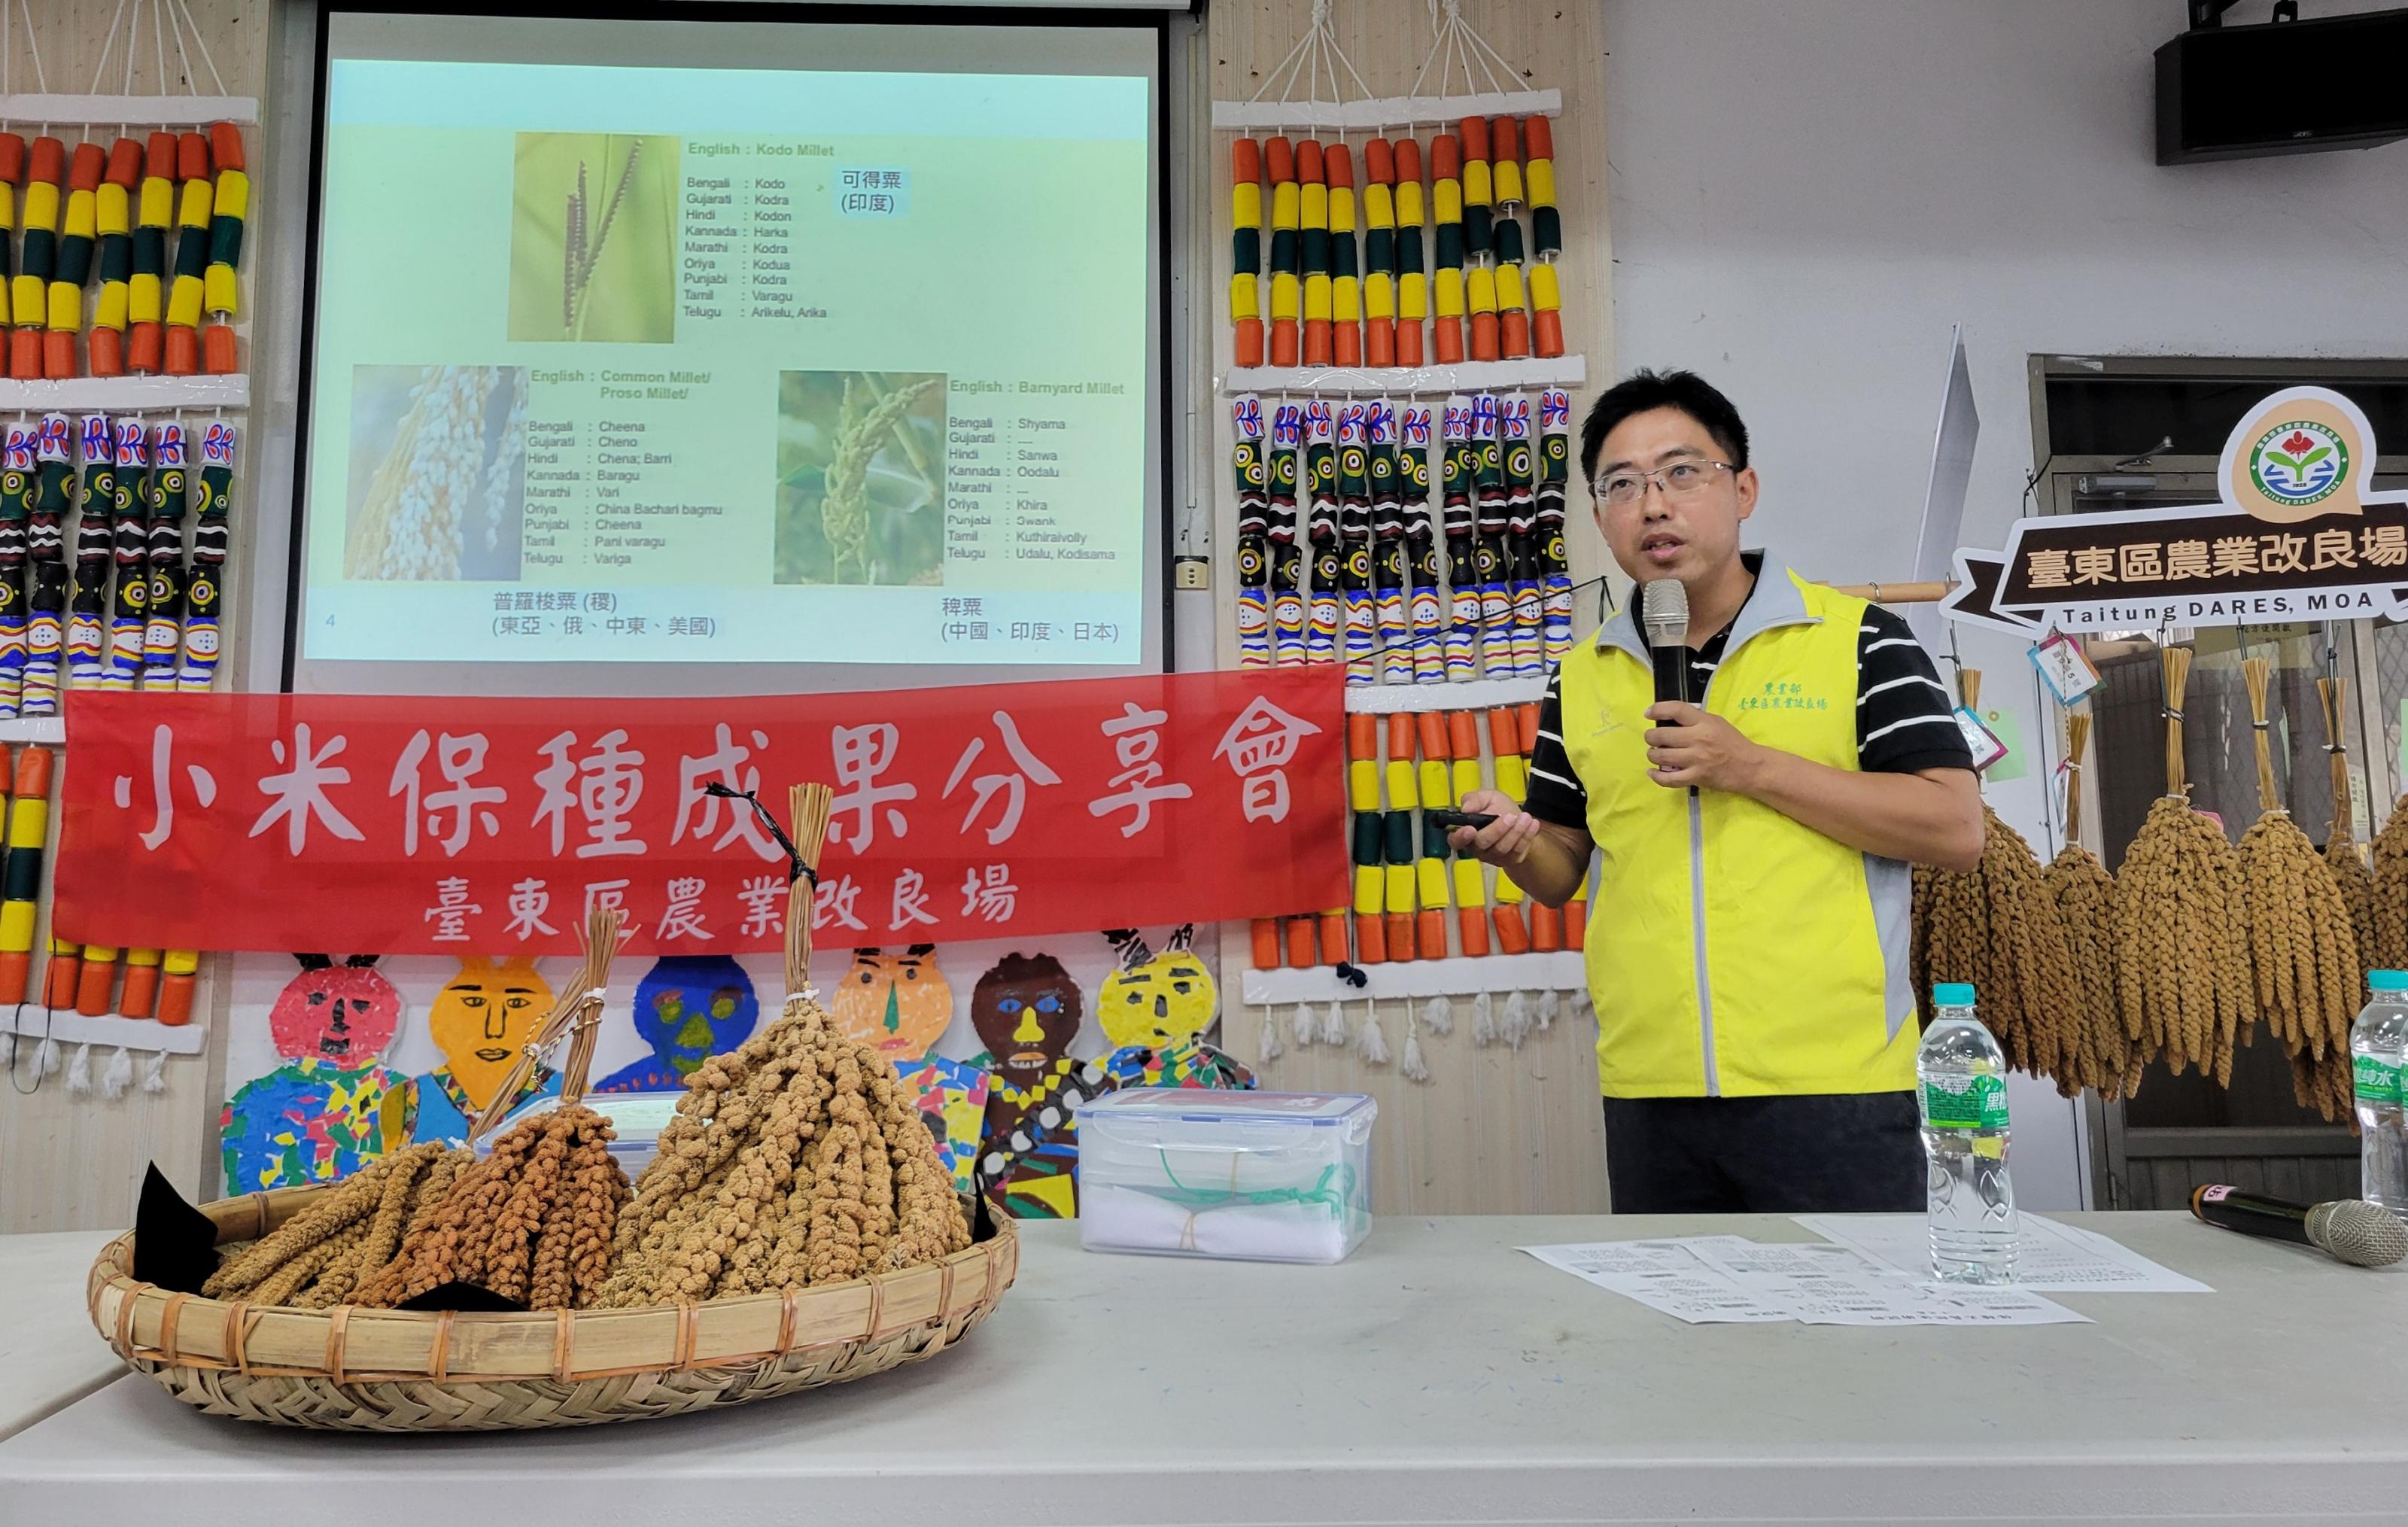 TTDARES assistant researcher Chang Fang-kuei introduced the features of the millet germplasm and seed preservation techniques.